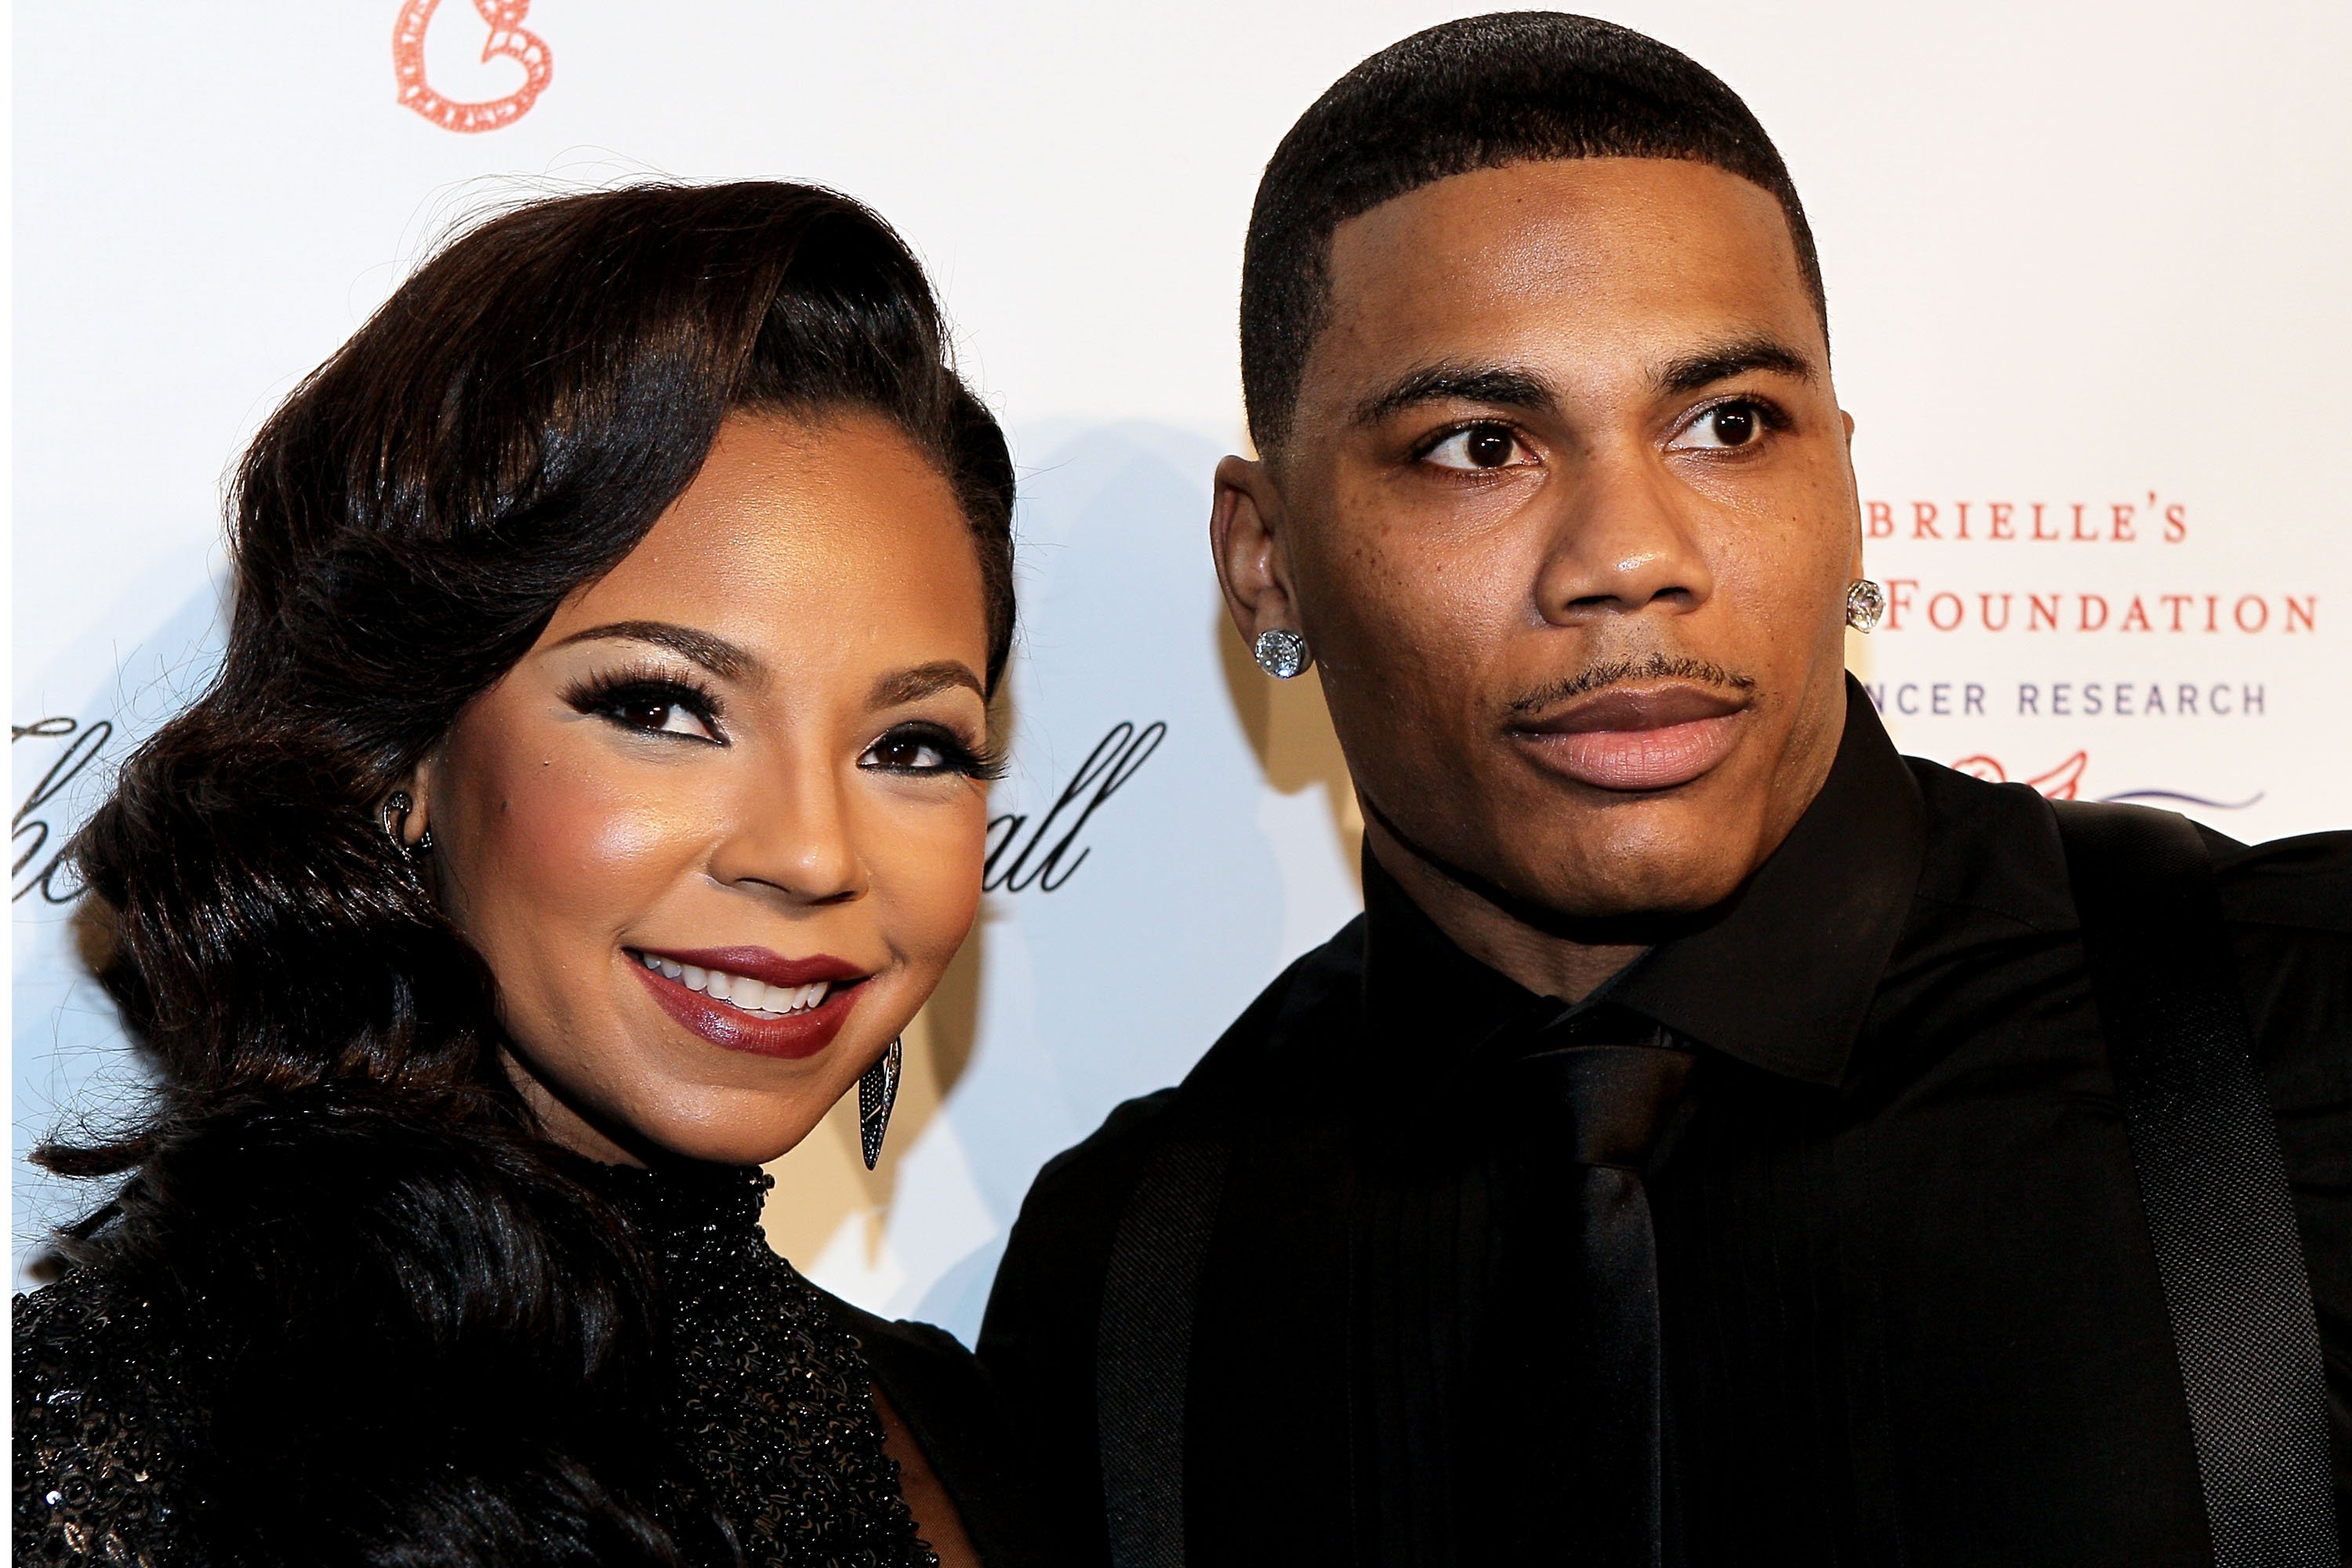 Ashanti and Nelly smiling and wearing black